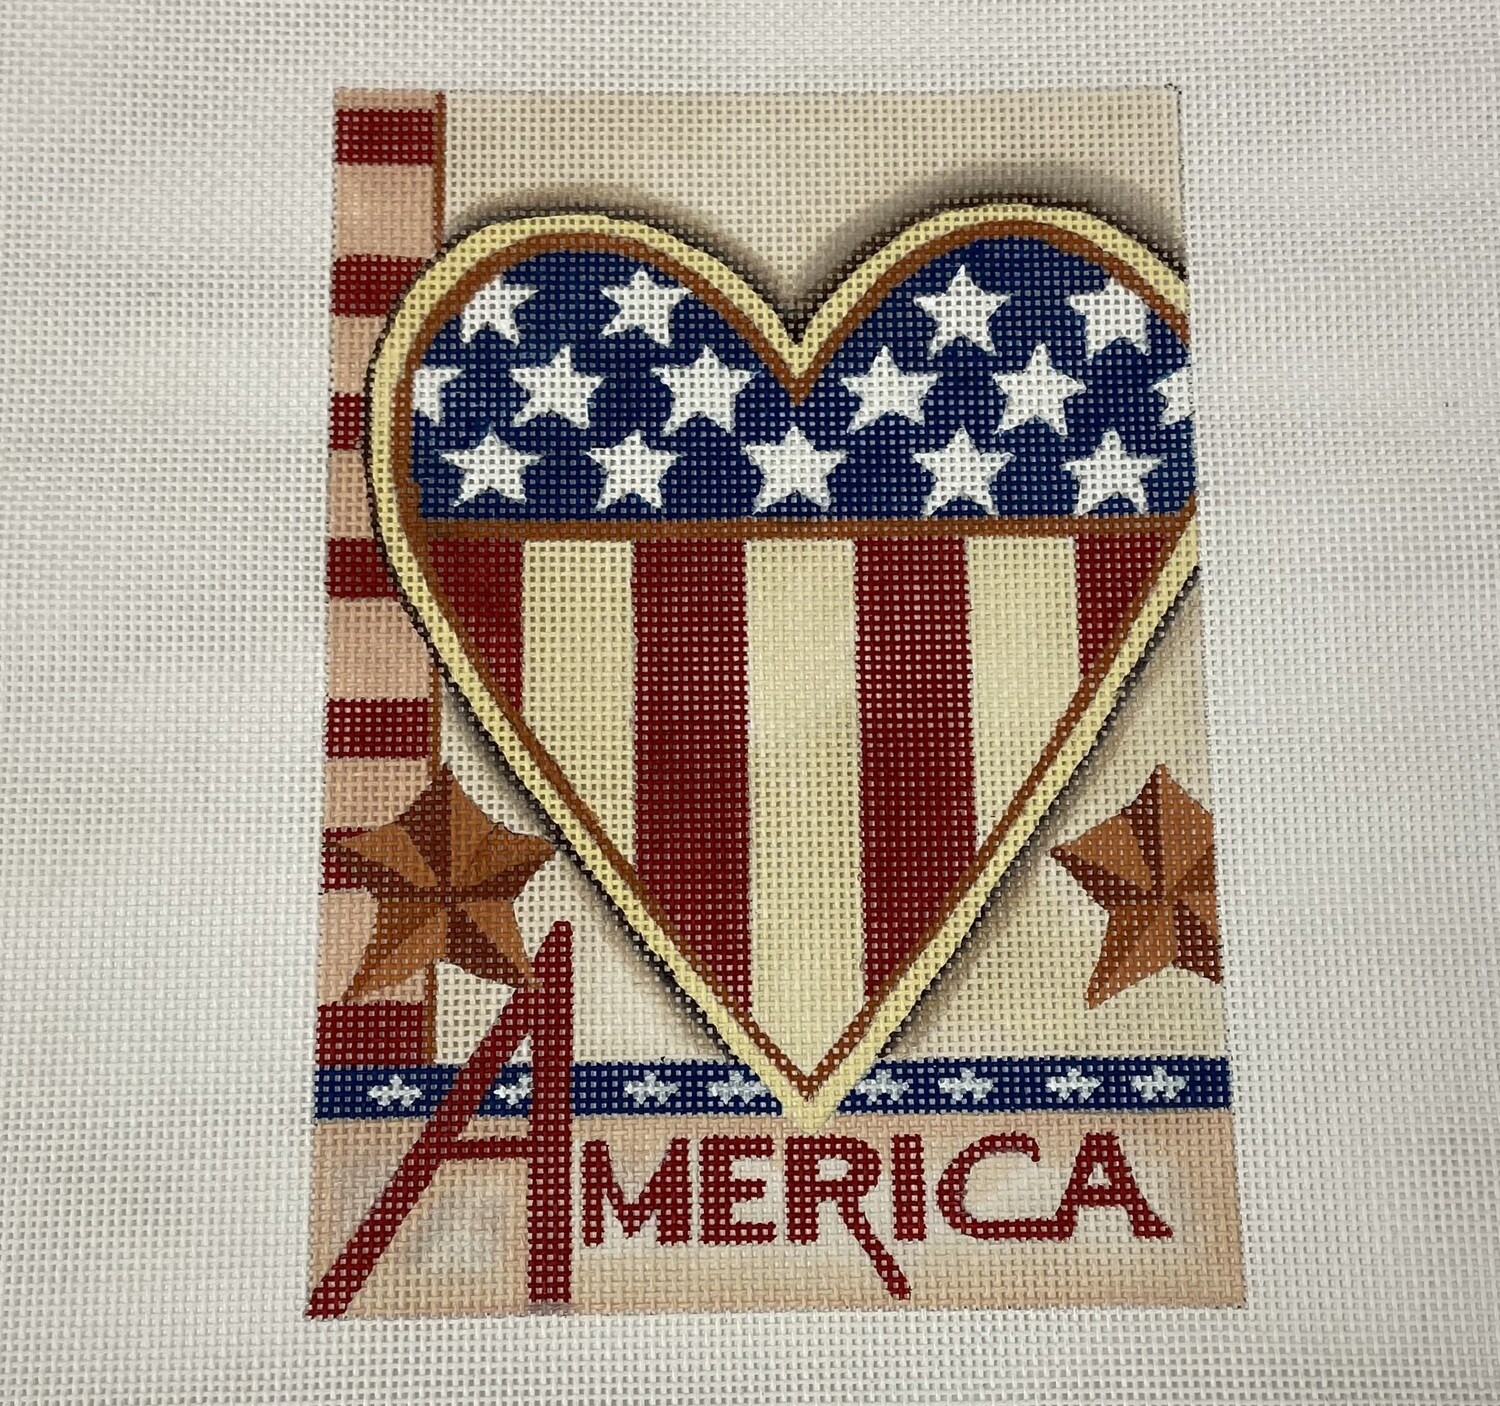 Heart of America - (Handpainted by PLD Designs) *Product may take longer than usual to arrive*